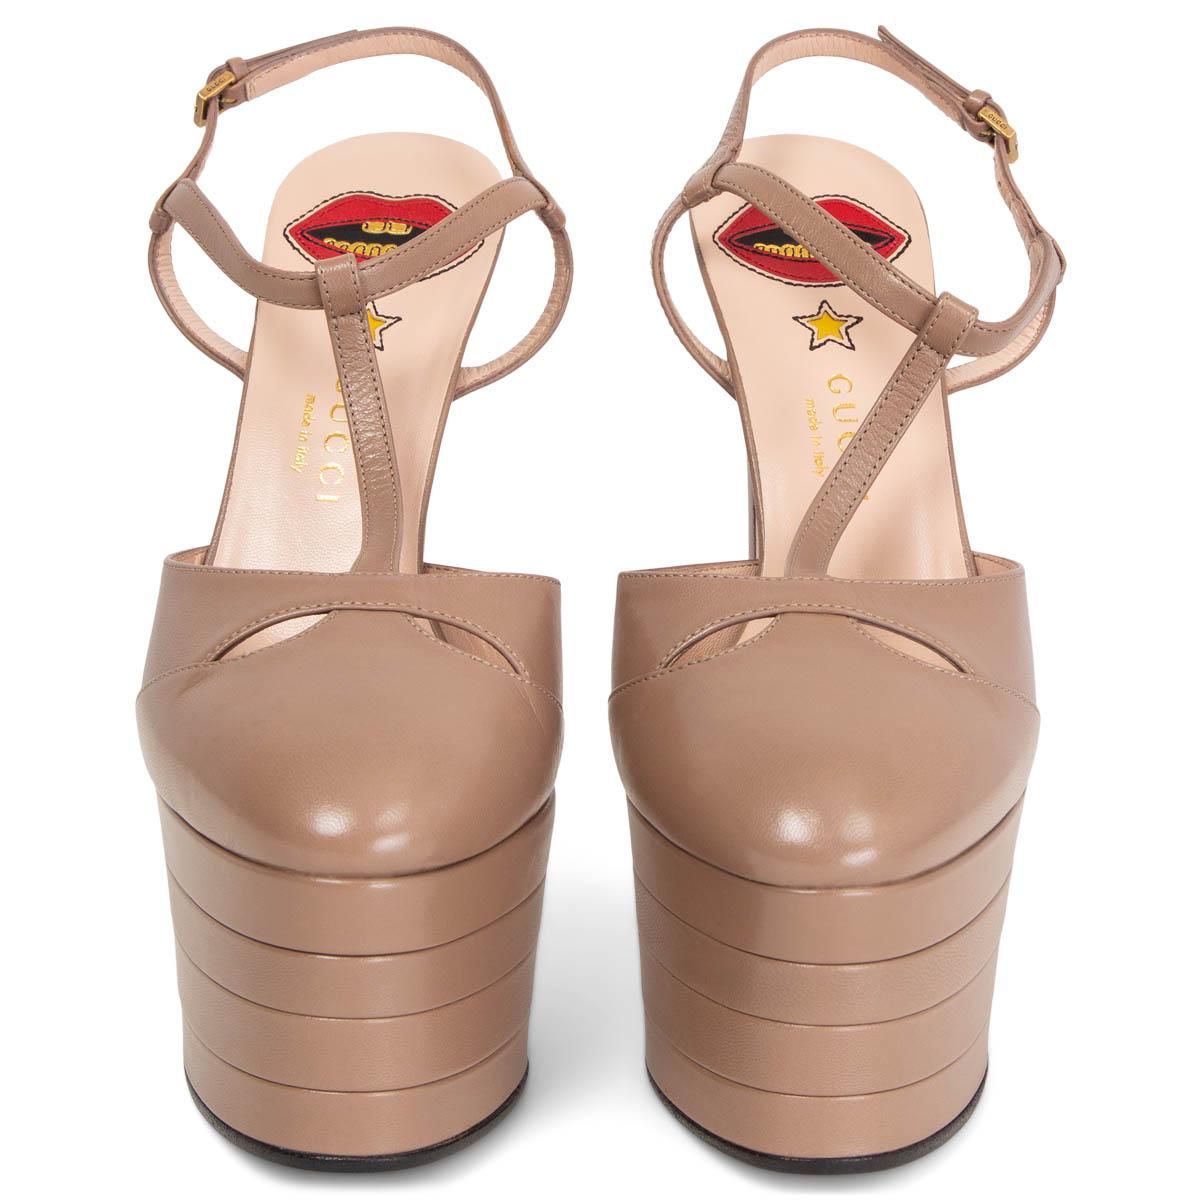 100% authentic Gucci Angel T-Strap Plattform Sandals in tan calfskin with ankle-strap closure. Brand new. 

Measurements
Imprinted Size 38
Shoe Size 38
Inside Sole 24.5cm (9.6in)
Width 7.5cm (2.9in)
Heel 16cm (6.2in)
Platform: 5.5cm (2.1in)

All our